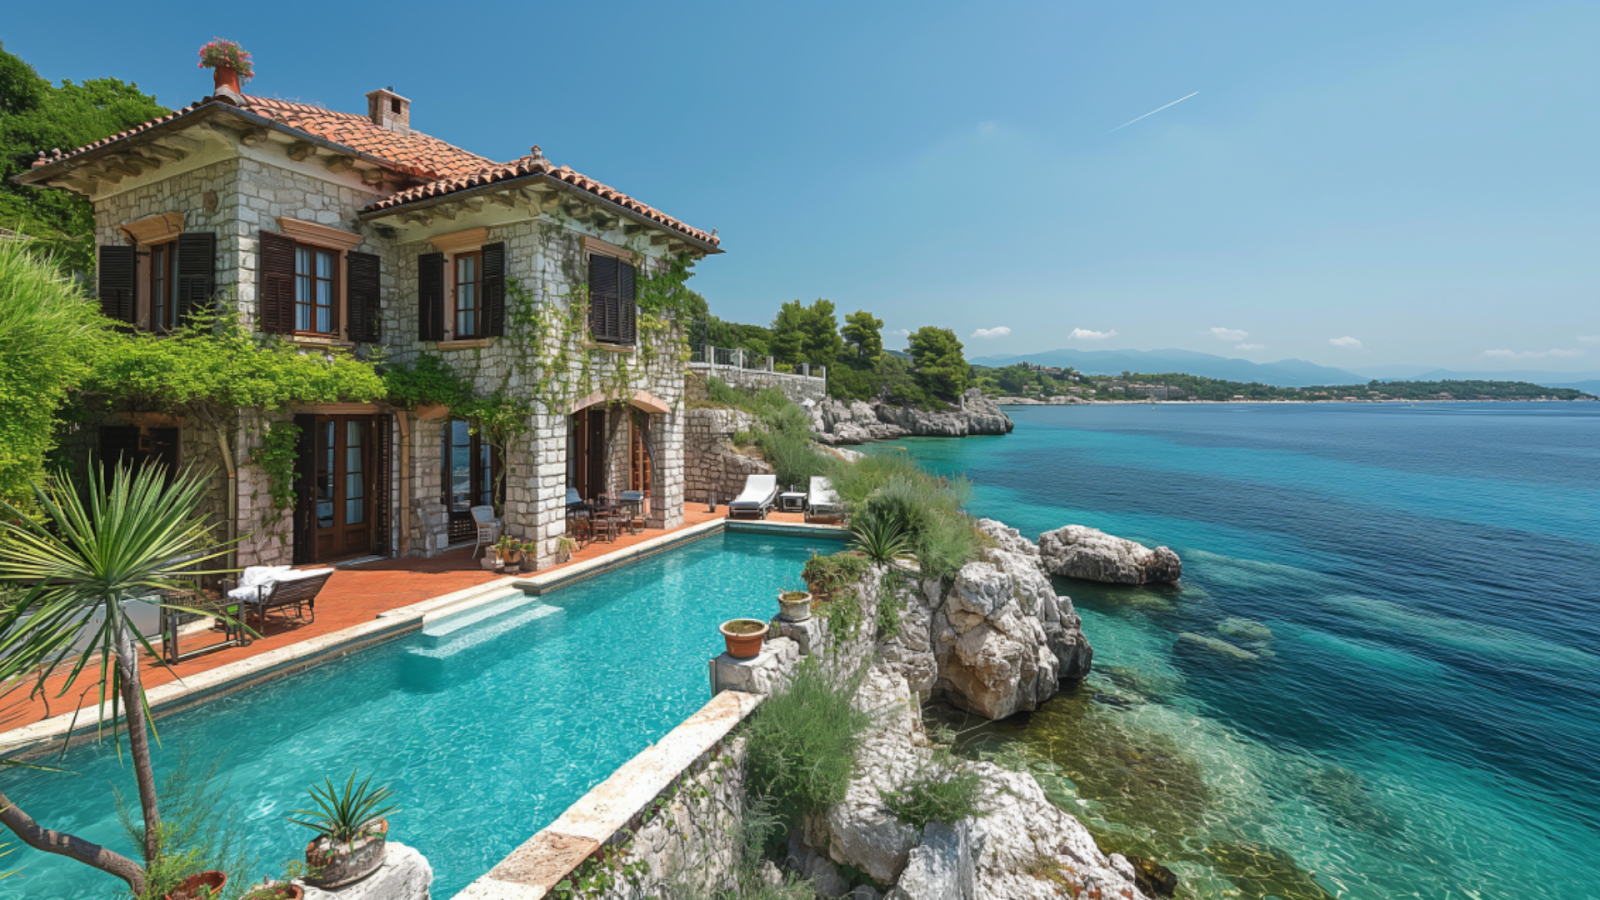 Luxury villa with infinity pool overlooking the crystal-clear Adriatic Sea.